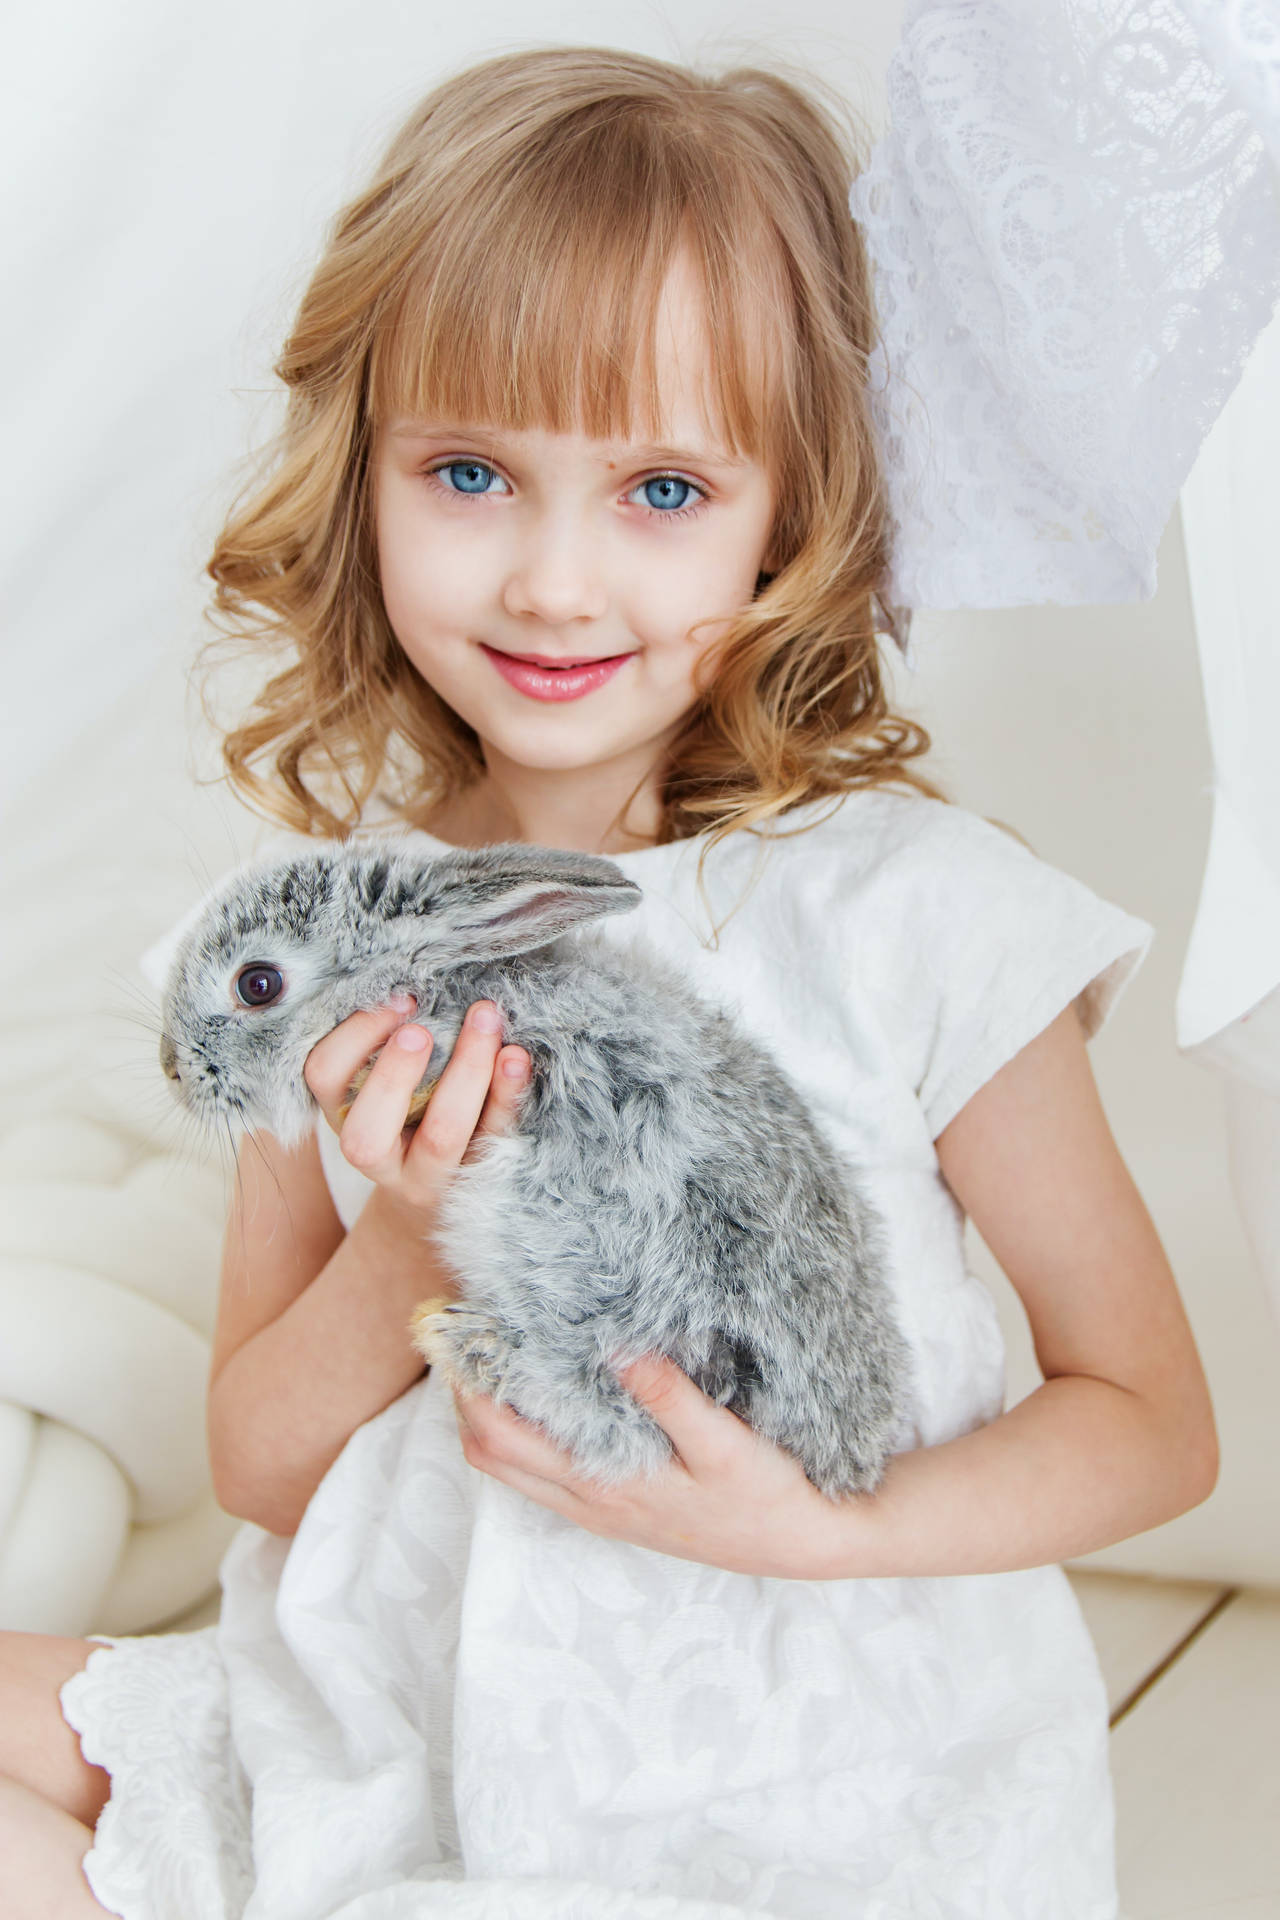 Cute Girl With Gray Rabbit